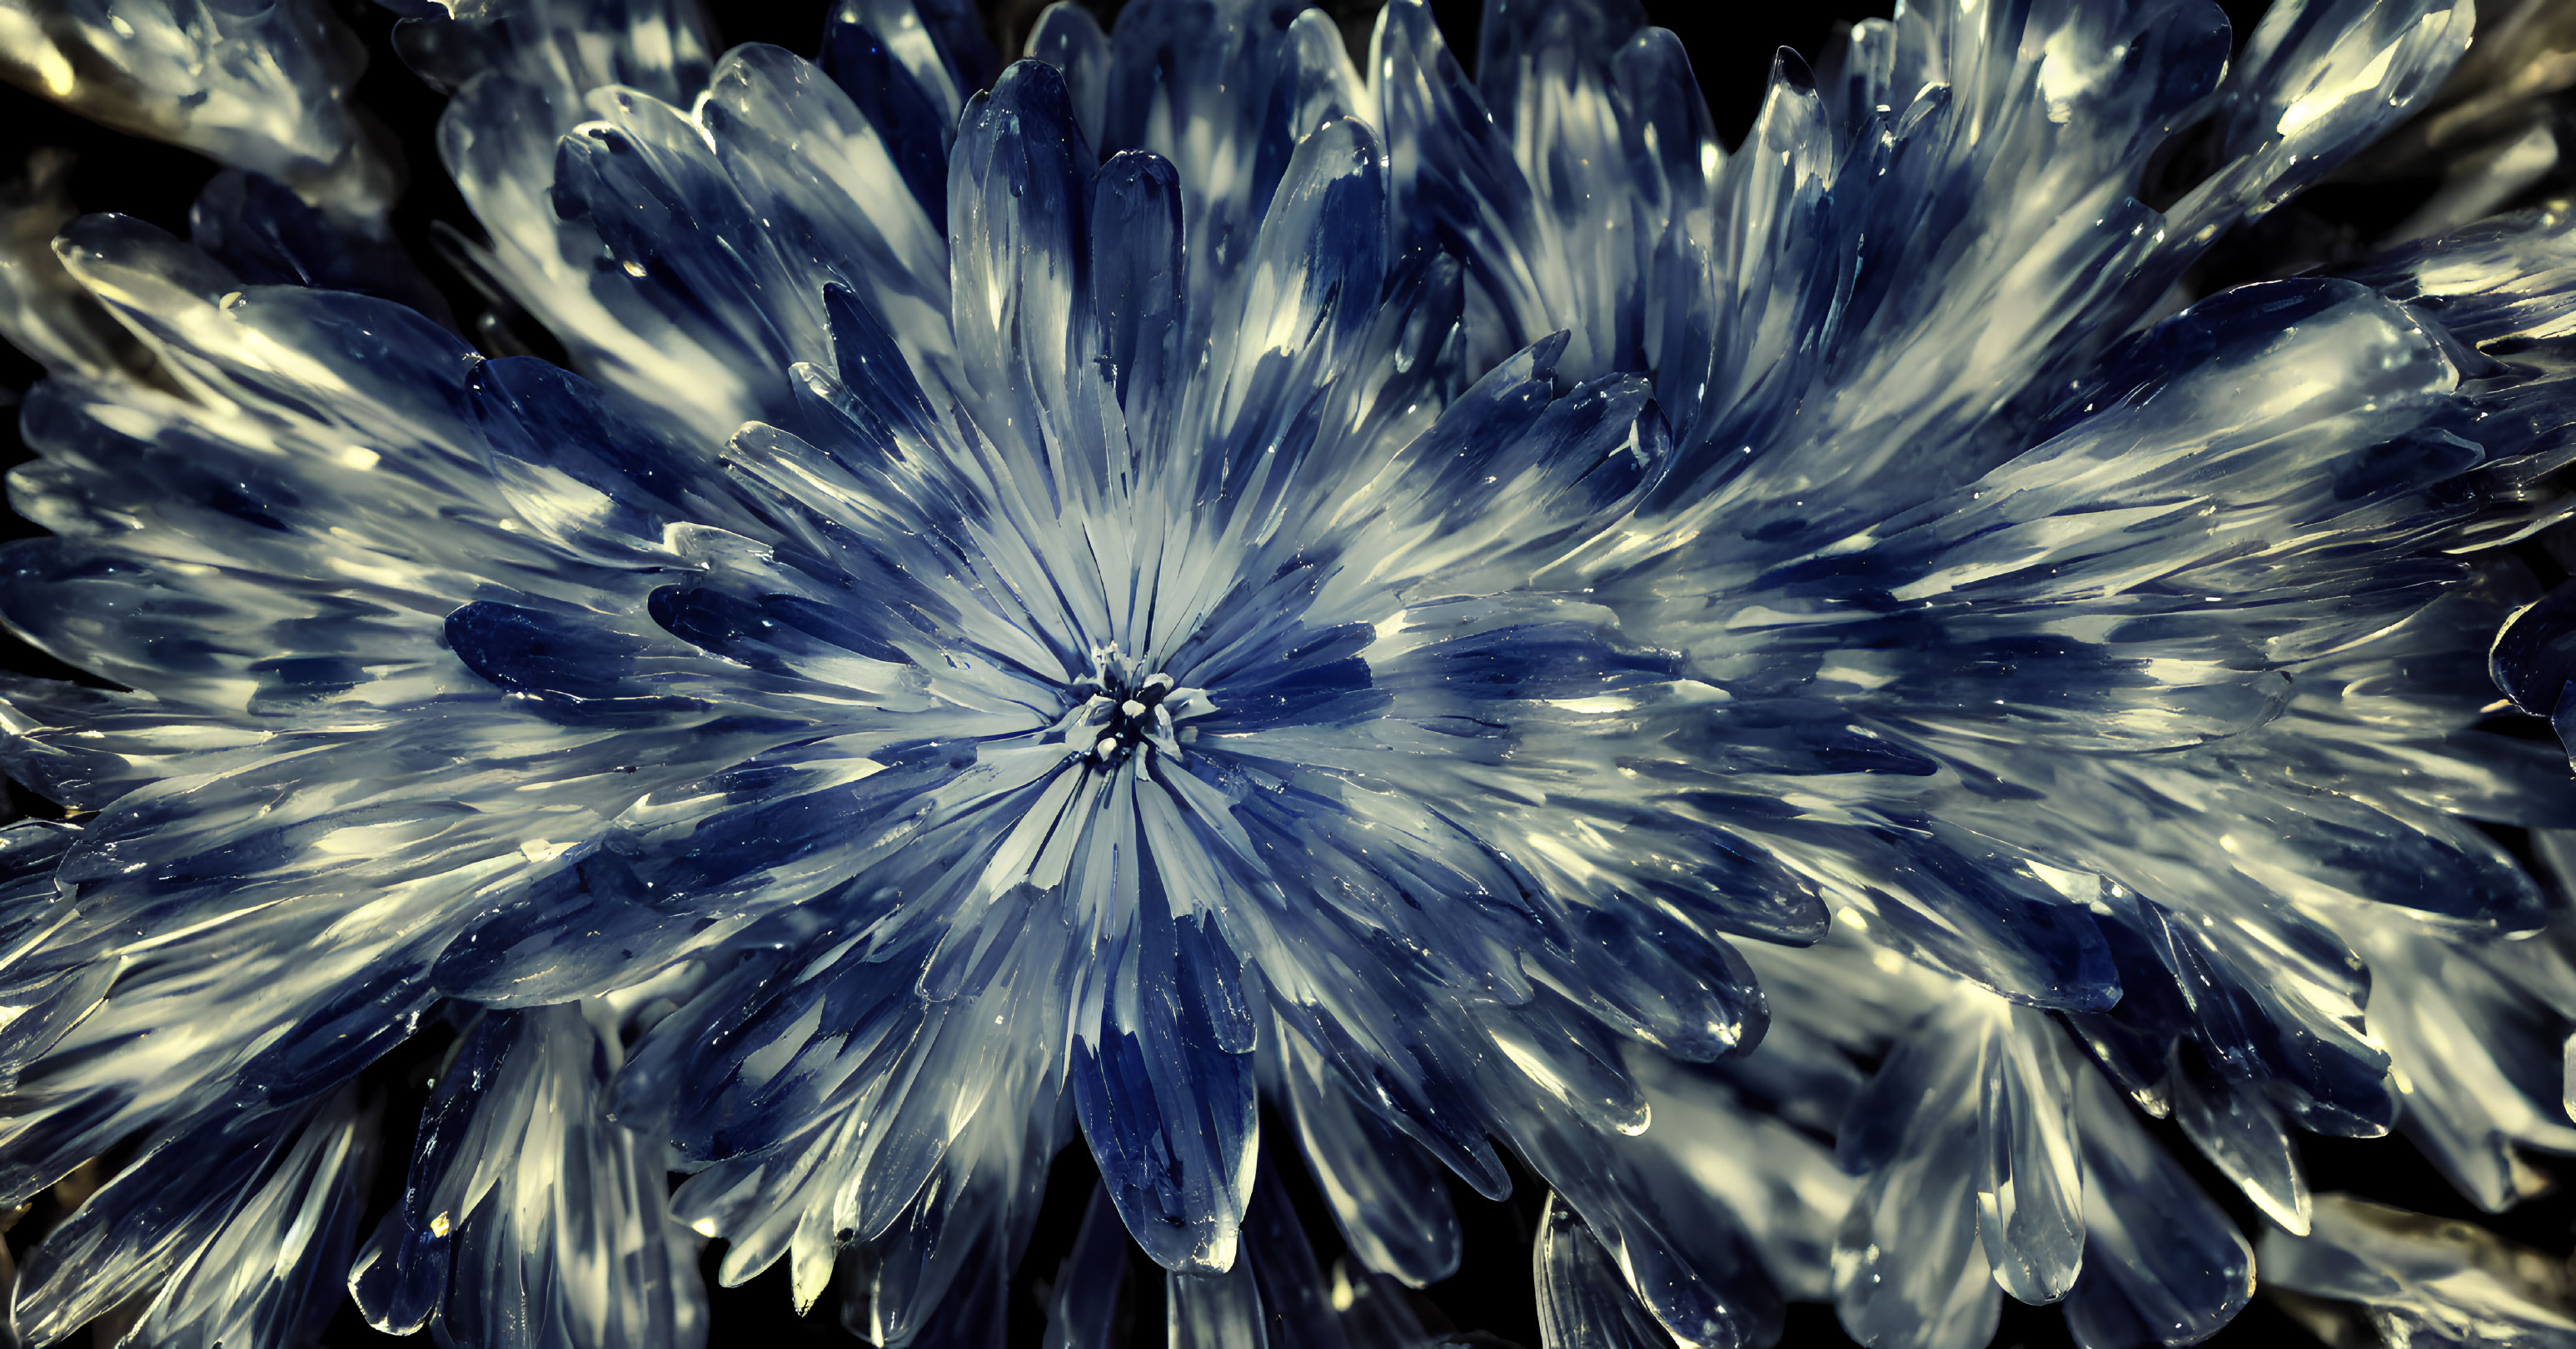 Monochrome close-up of blue-tinted flowers showcasing intricate petal details